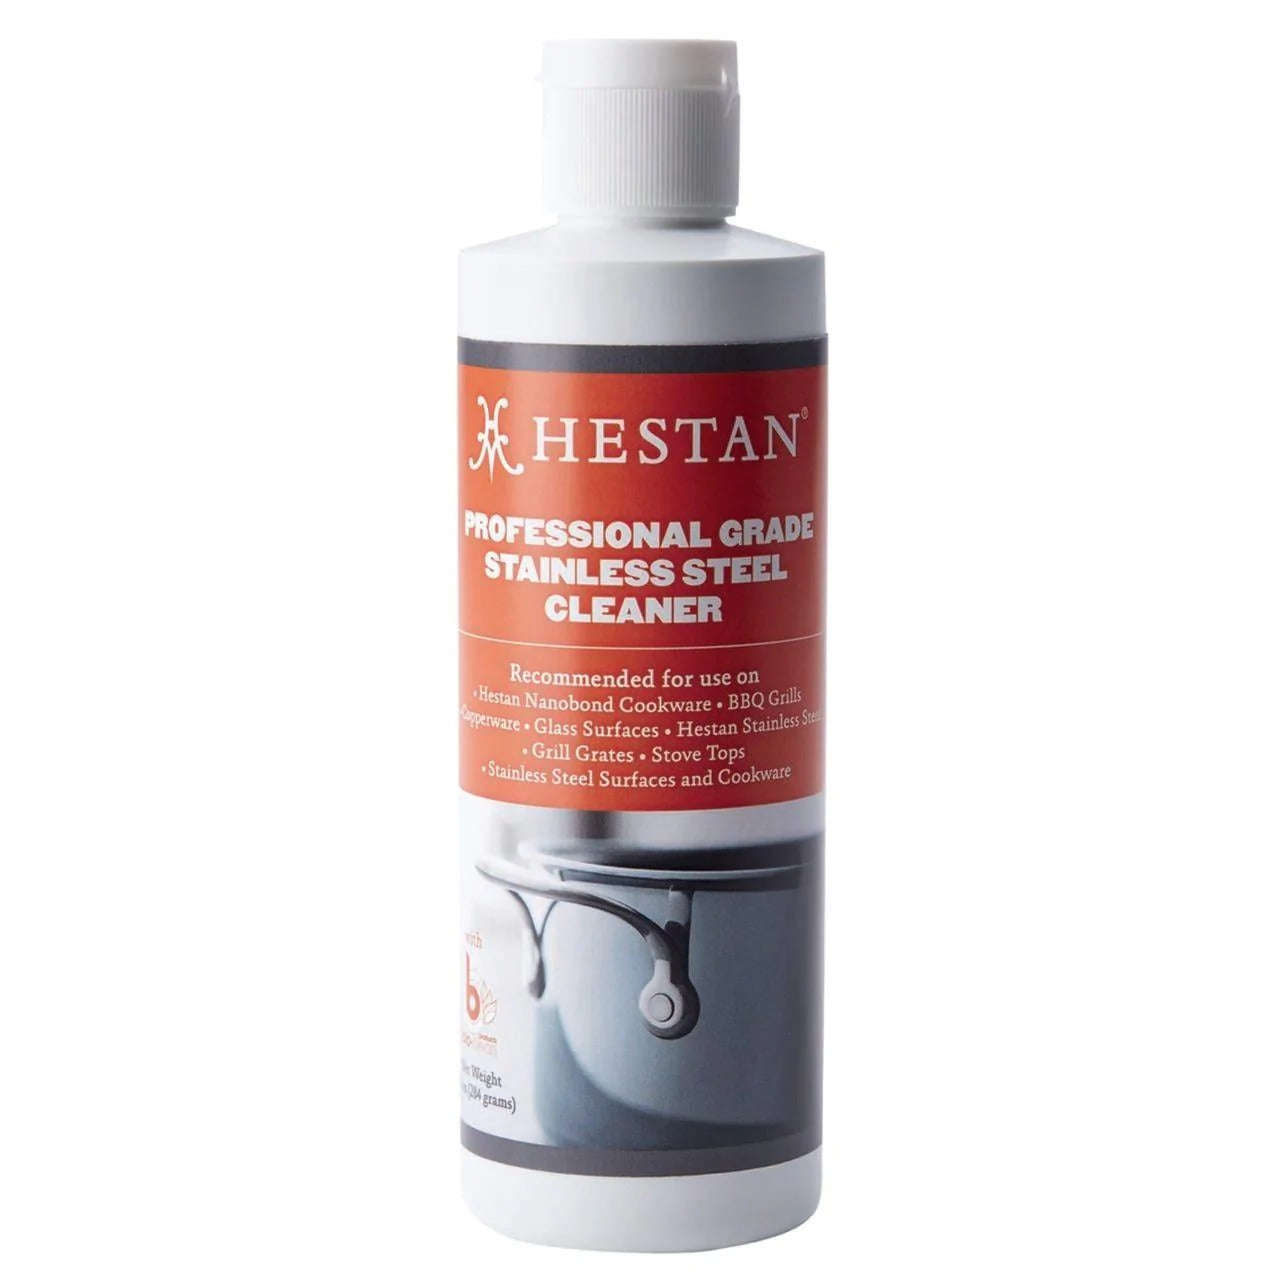 Hestan Professional Stainless Steel Cleaner